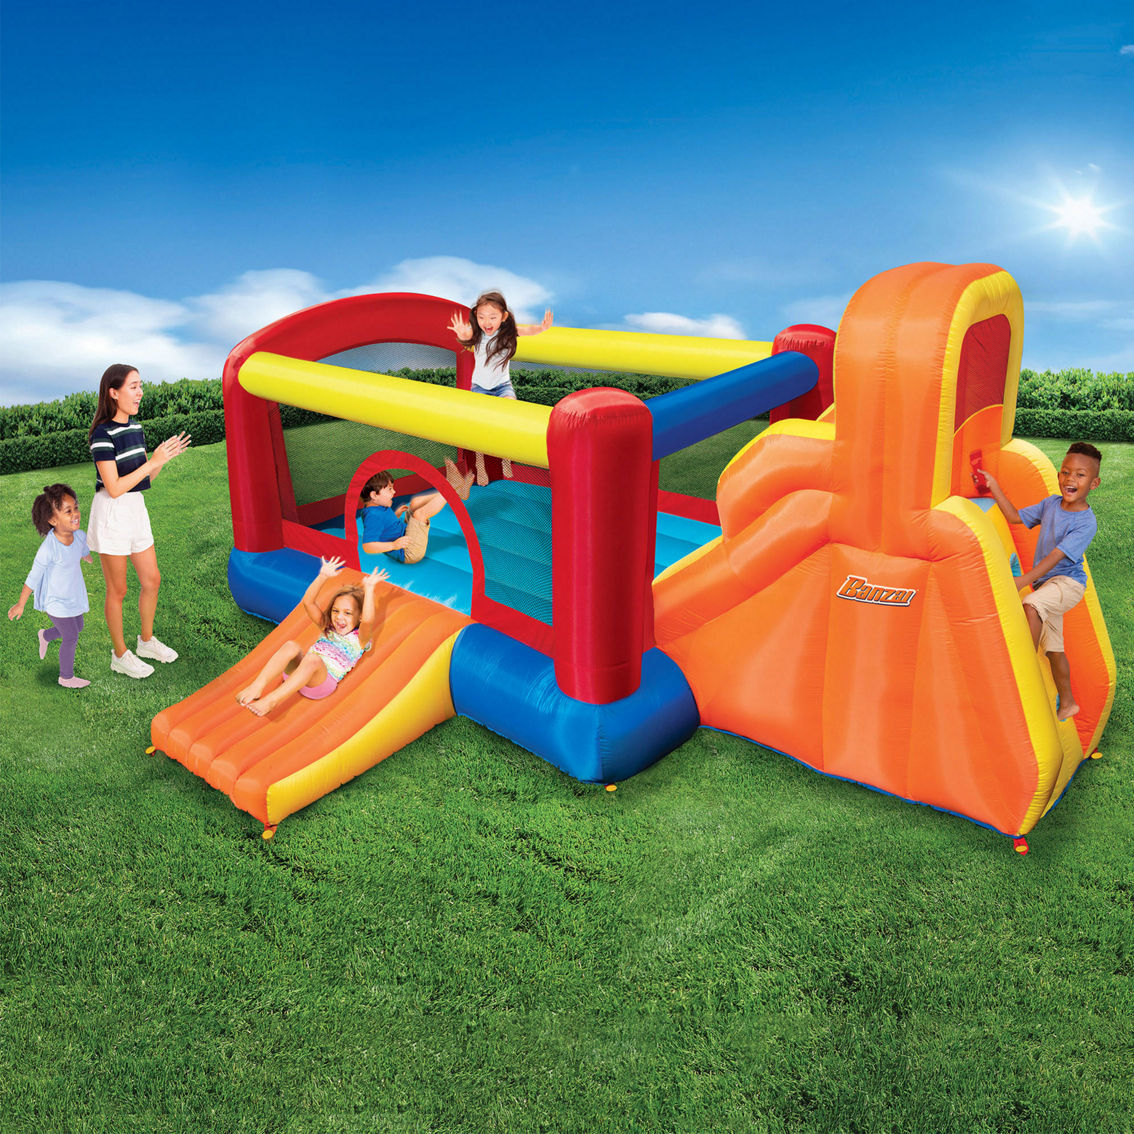 Double Slide Bouncer - Image 8 of 8